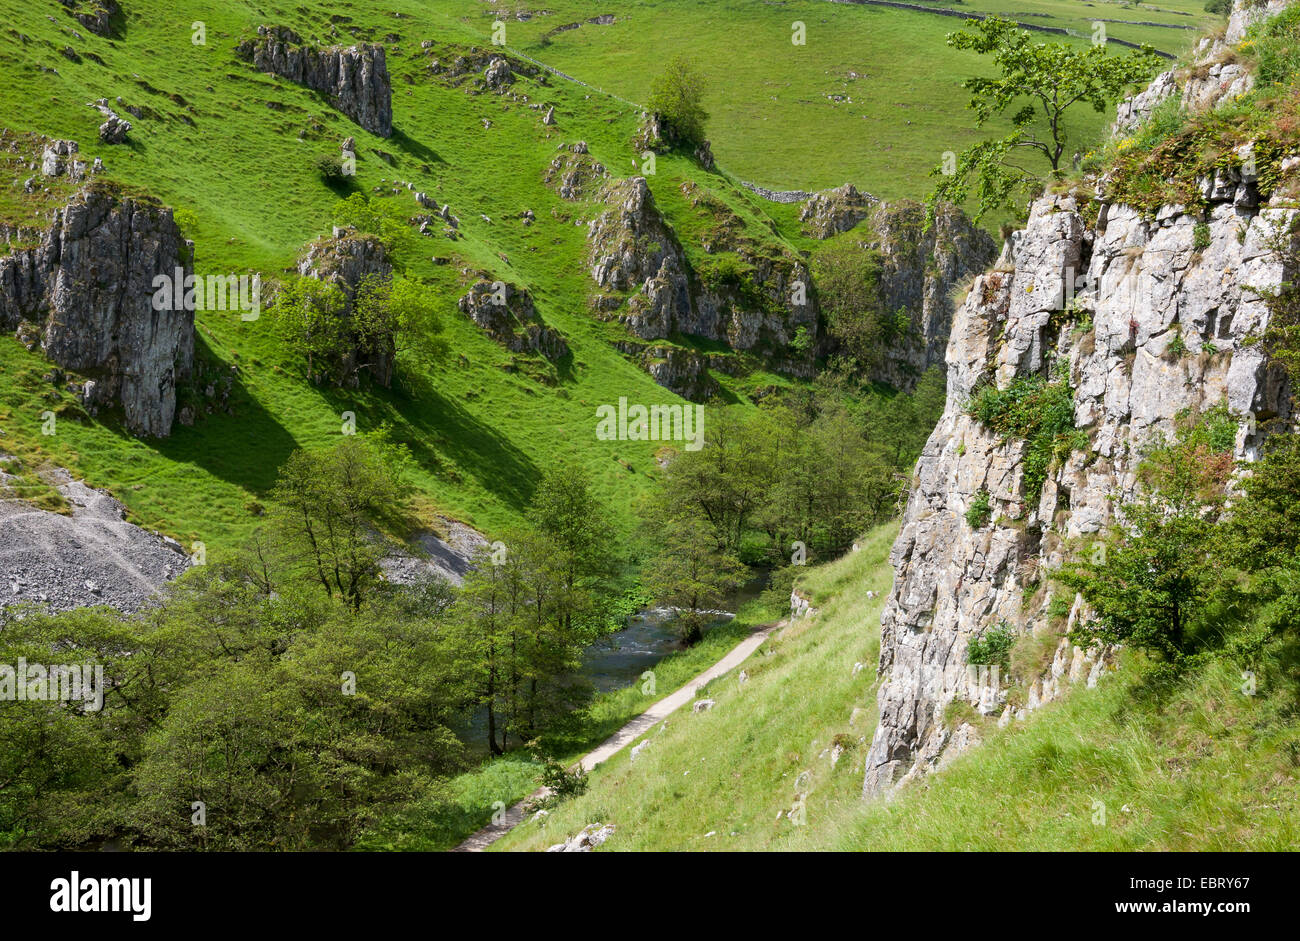 Limestone rocks in the dramatic landscape of Wolfscote Dale in the Peak District. A beautiful summer day. Stock Photo